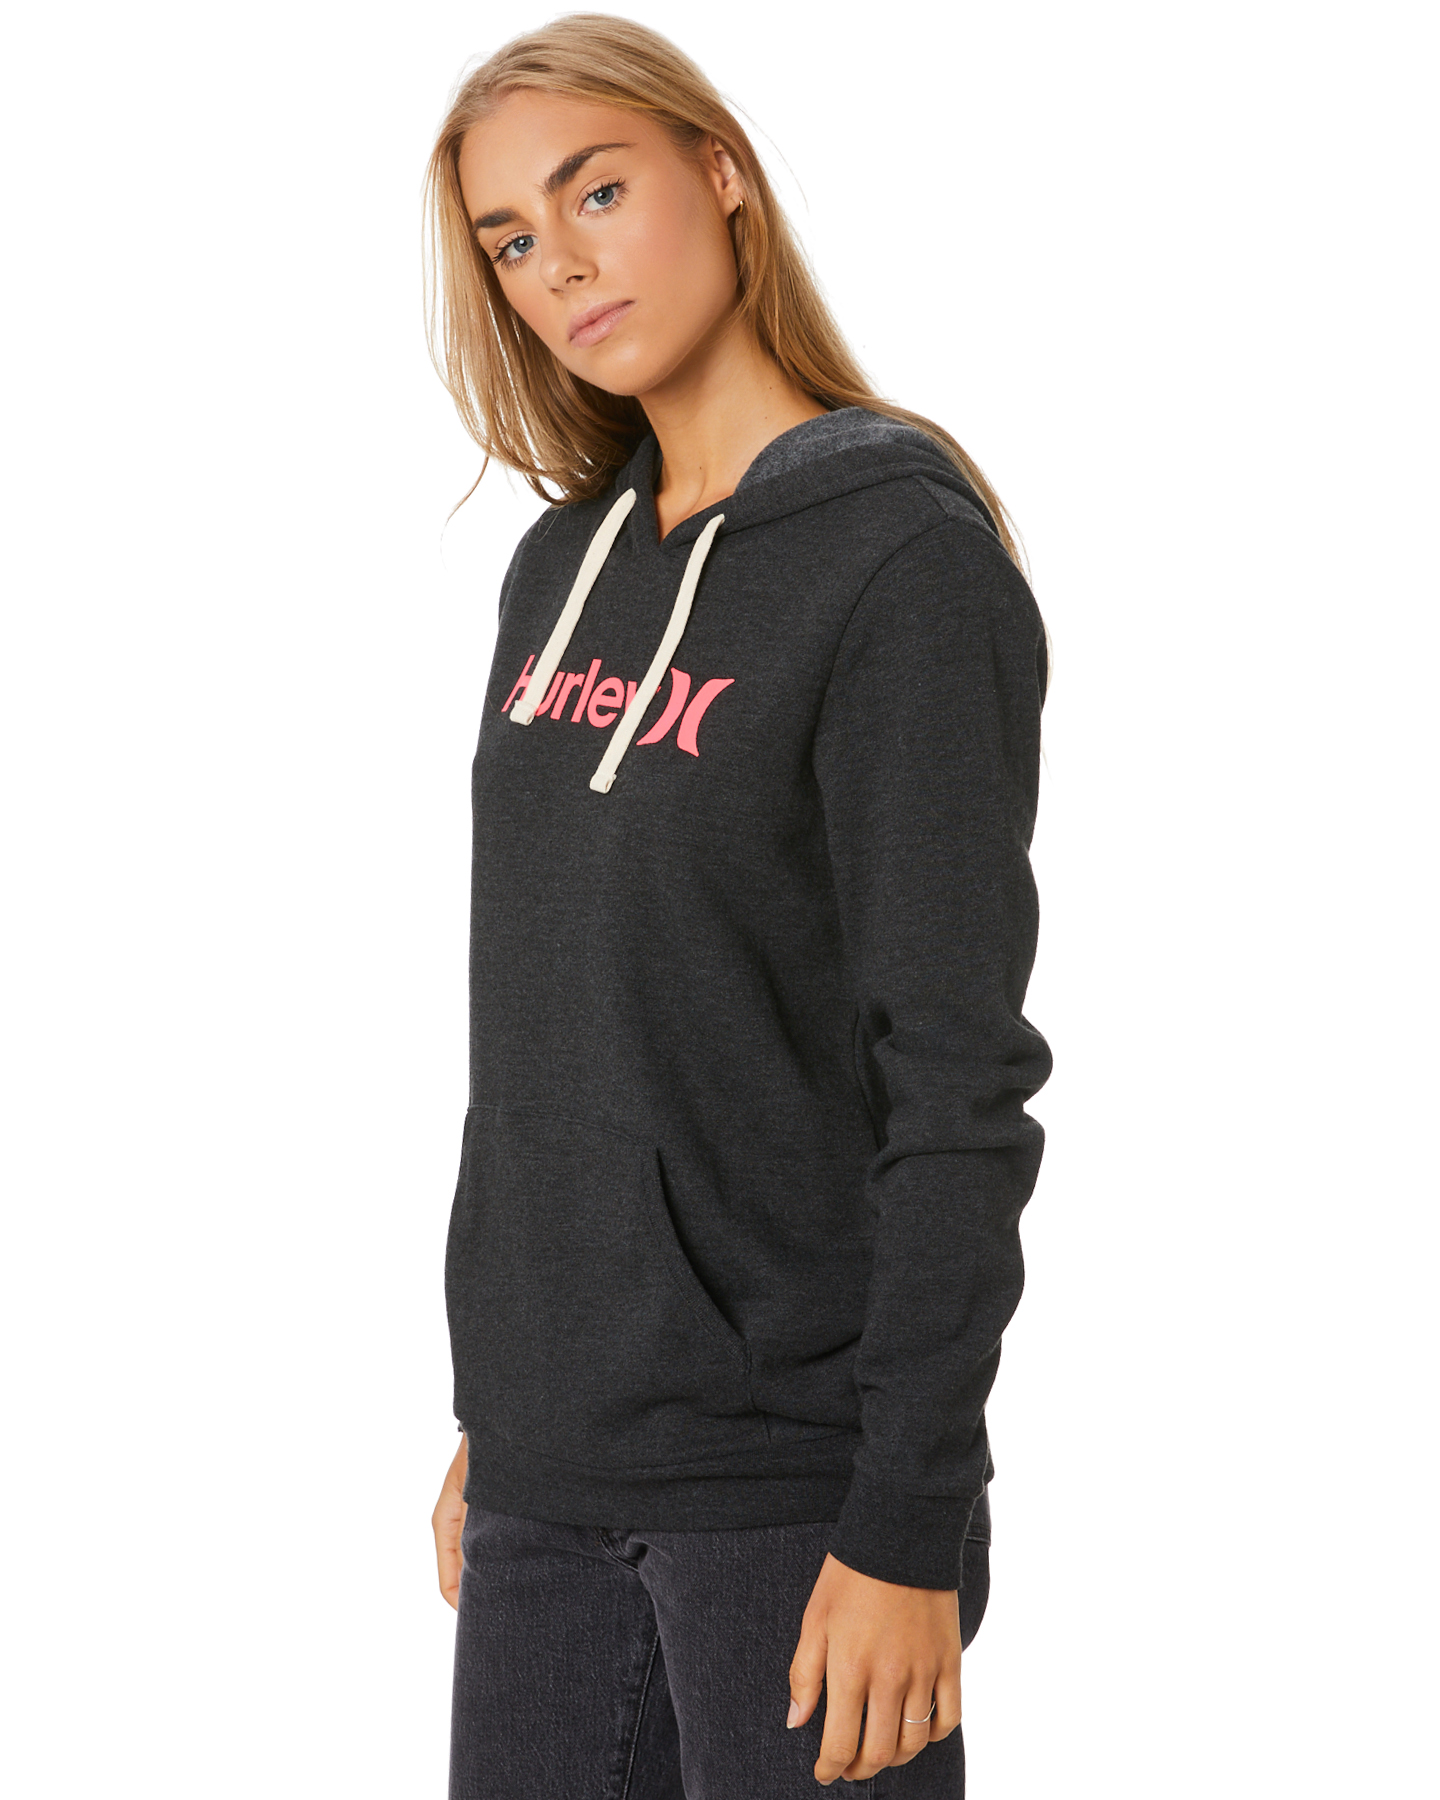 Hurley One And Only Pullover Fleece - Black Heather | SurfStitch